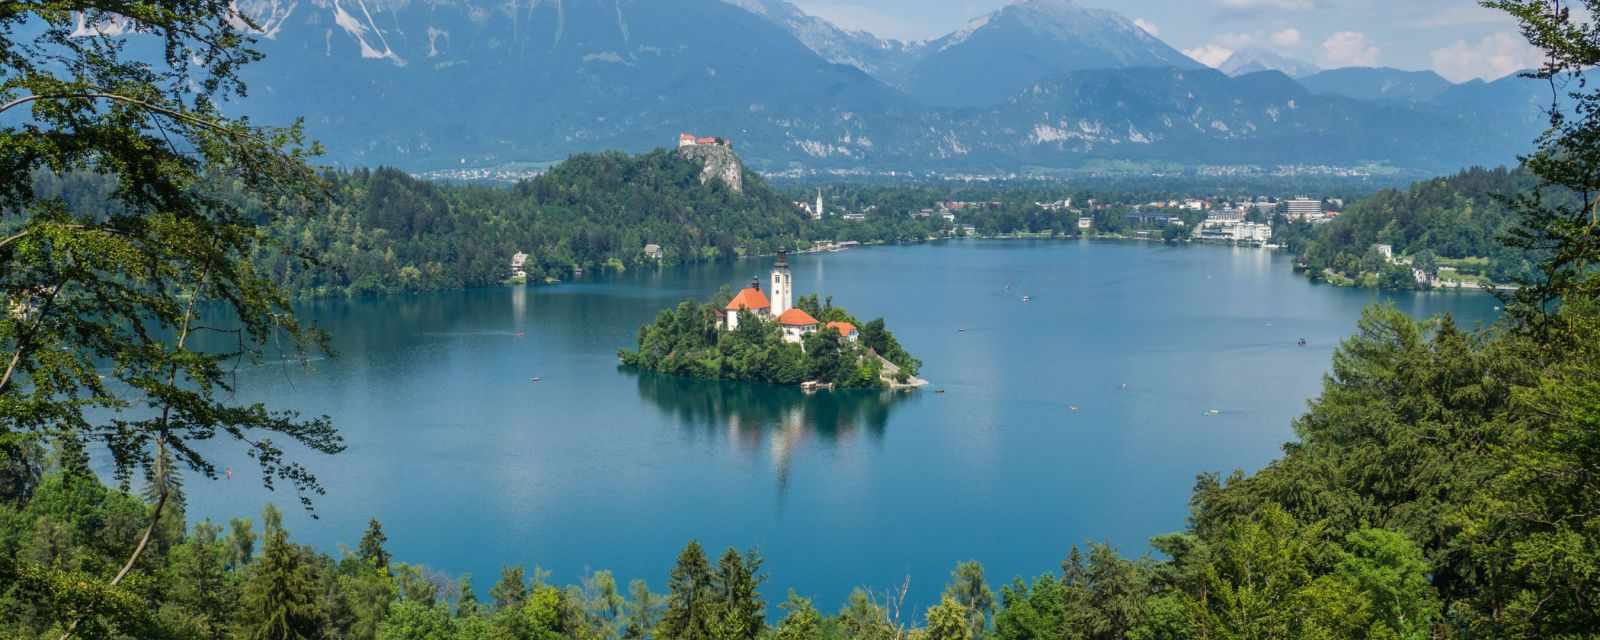 Lake Bled in Slovenia - Mala Osojnica Viewpoint and 5 Things to Do